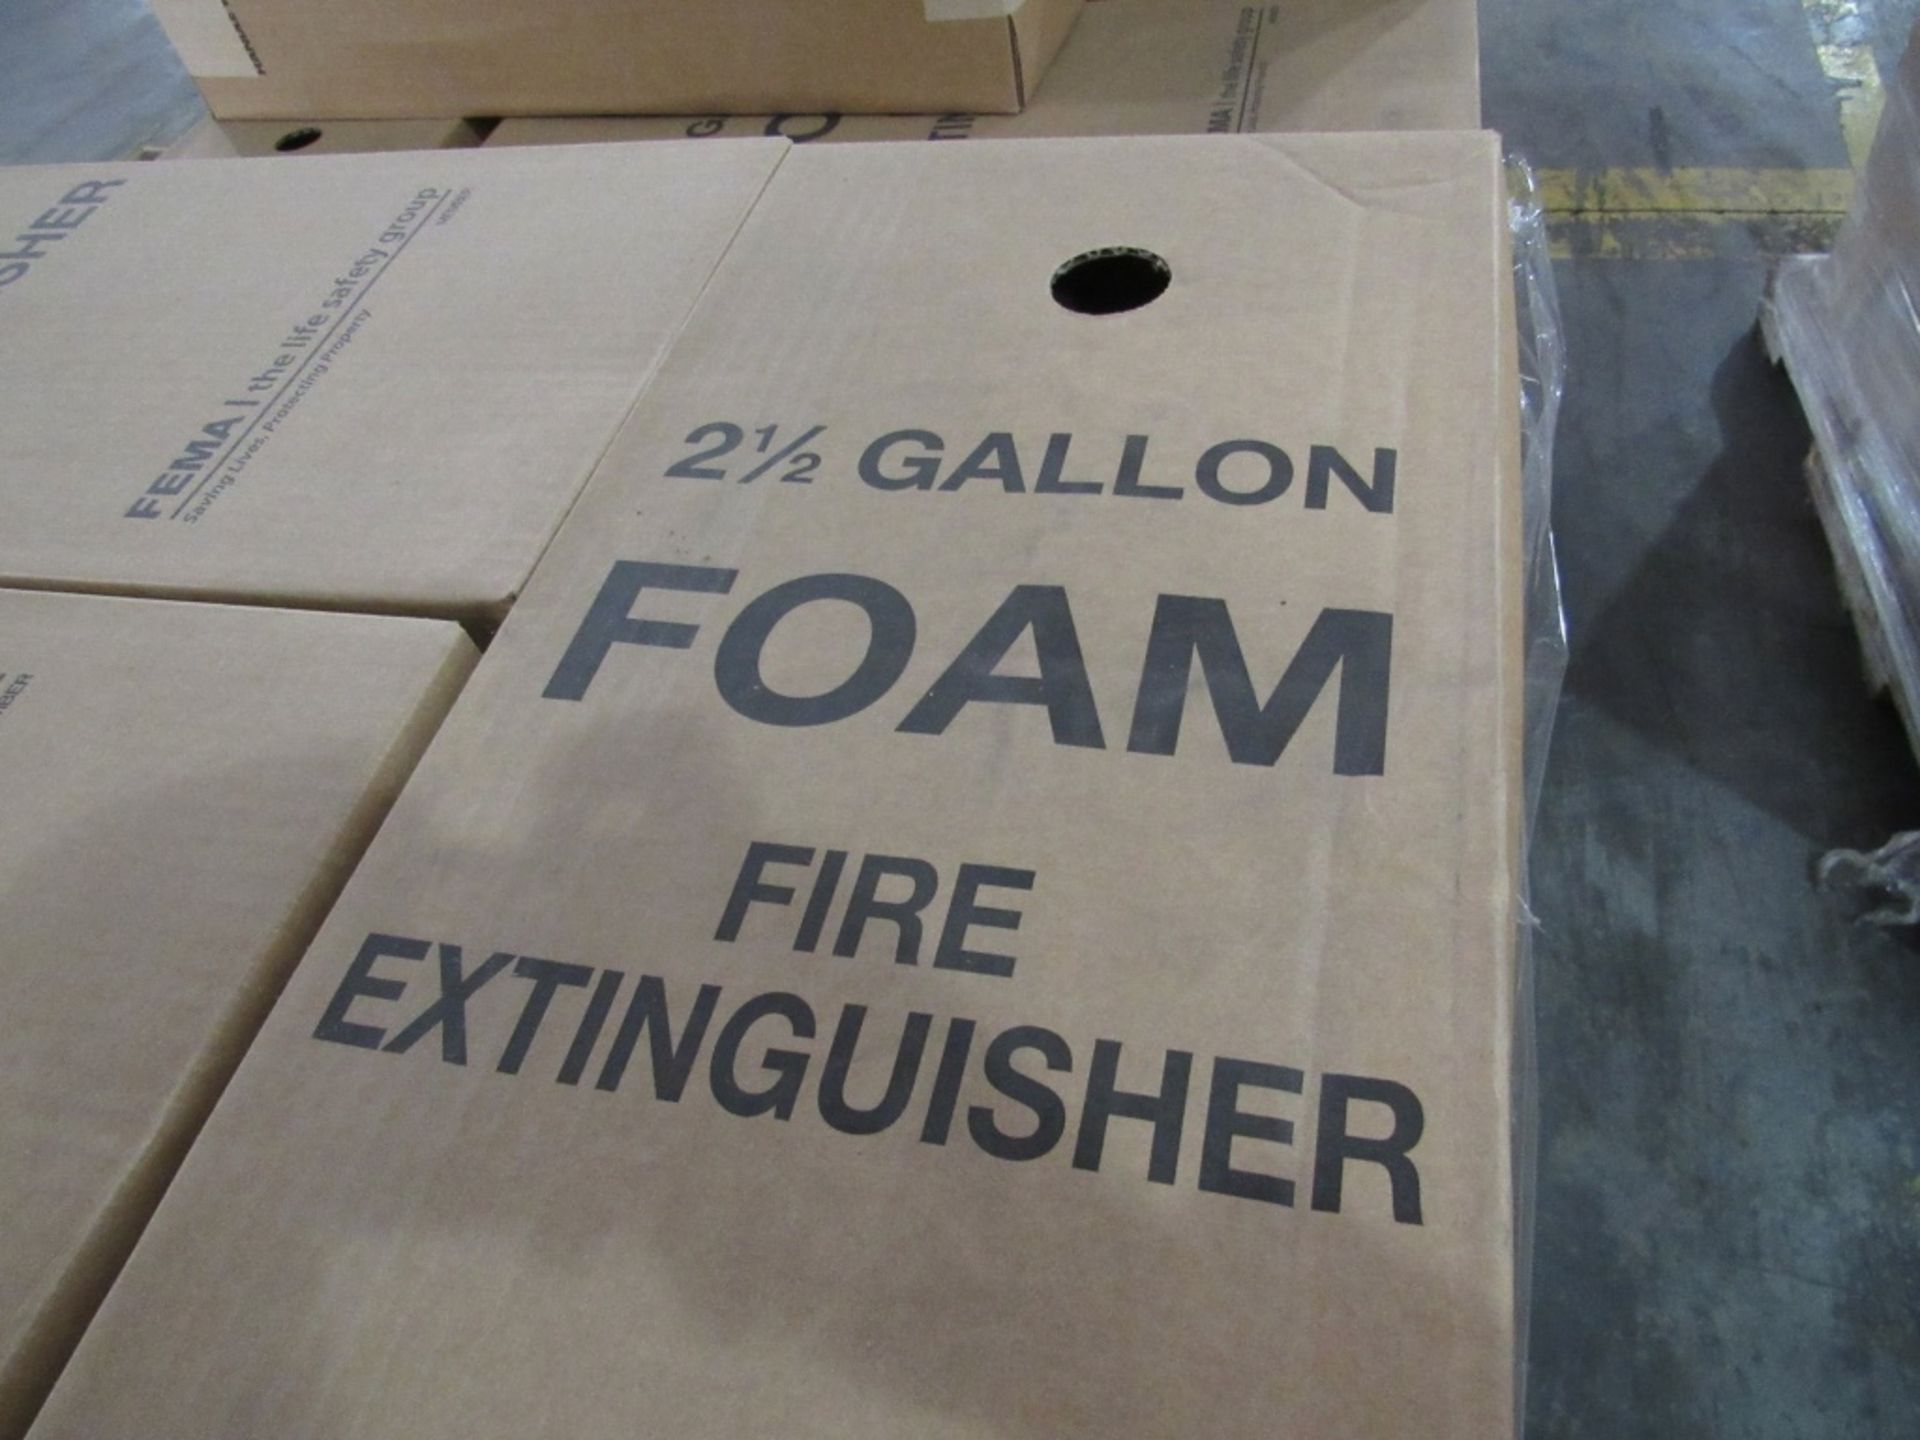 (qty - 36) *NEW* Foam Fire Extinguishers- ***Located in Cleveland, TN*** MFR - Amerex 2 1/2 gal./ - Image 2 of 8